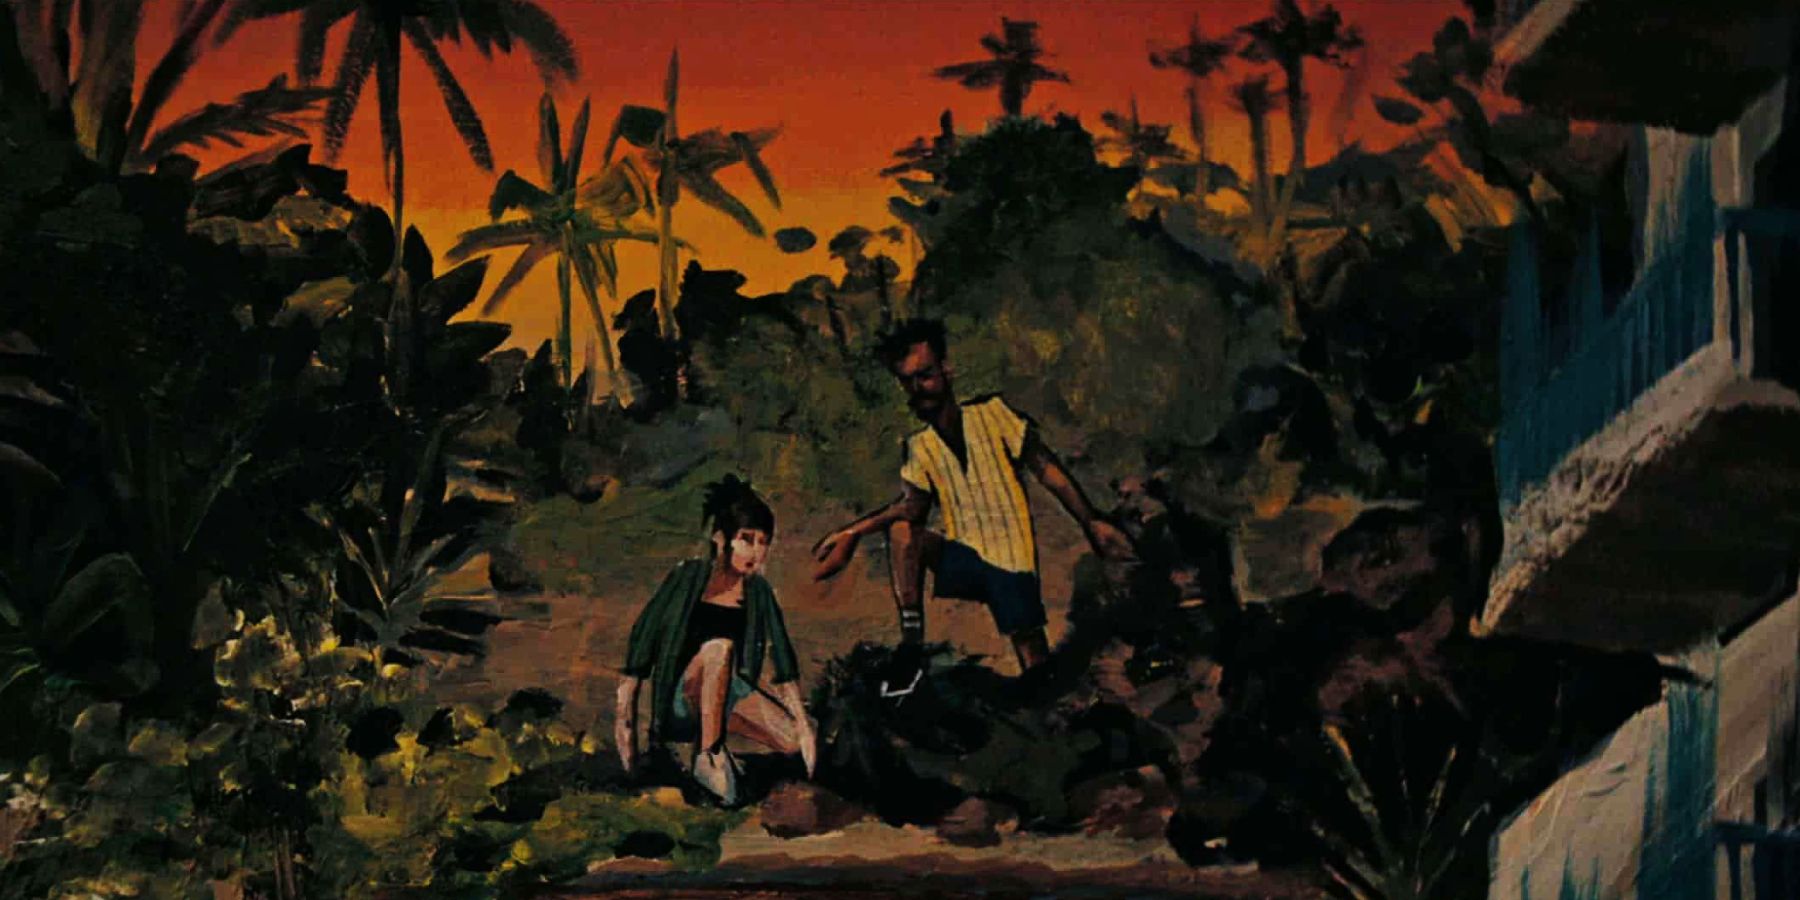 Alex's mural depicts Emma and Noah entering Pasaje in The Resort episode 5